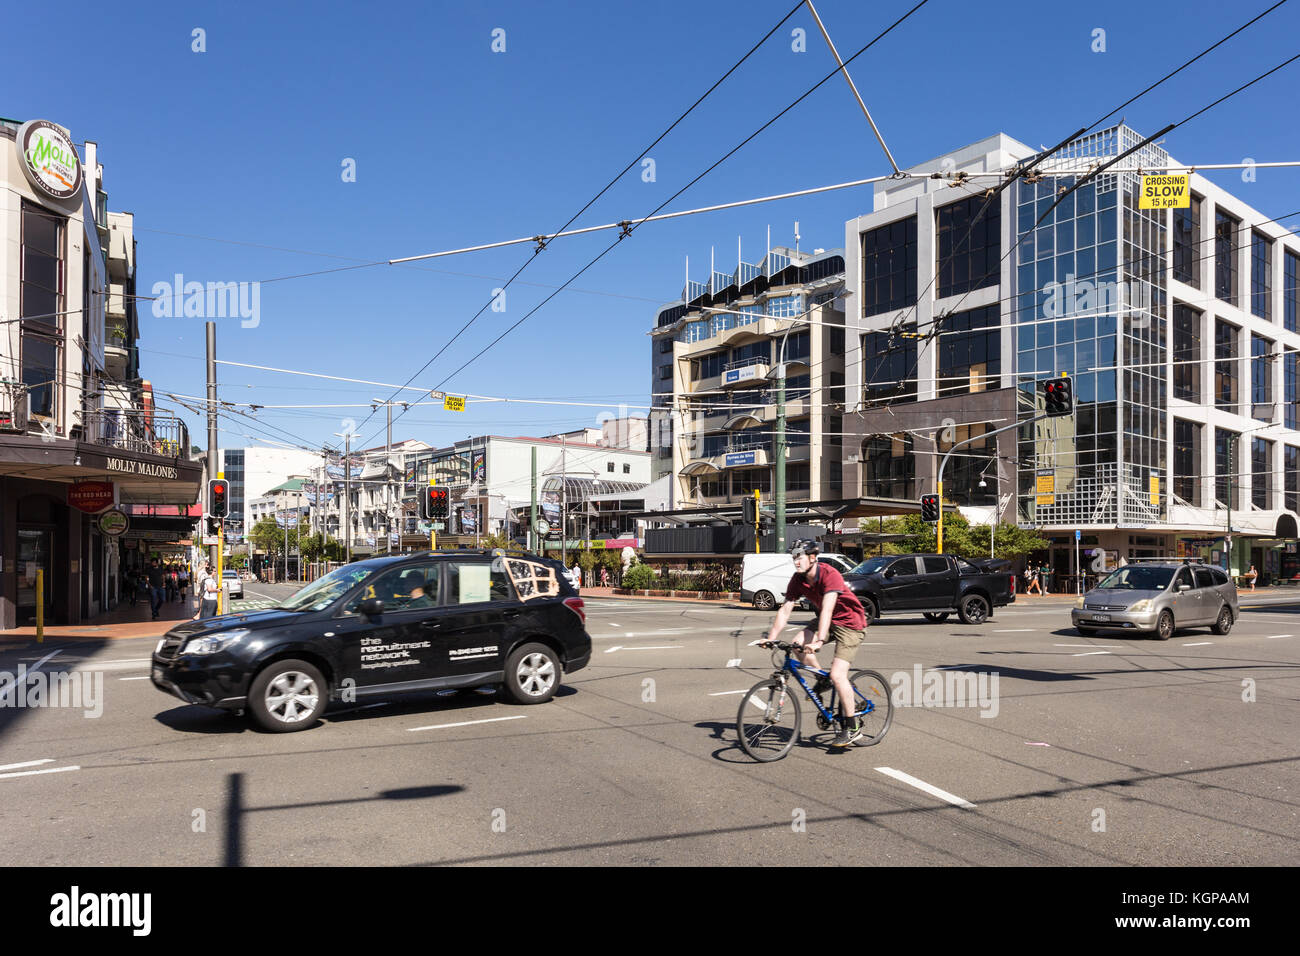 WELLINGTON, NEW ZEALAND - MARCH 1, 2017: Man ride a bicycle in the traffic in Wellingtion on a sunny summer day in New Zealand capital city. Stock Photo